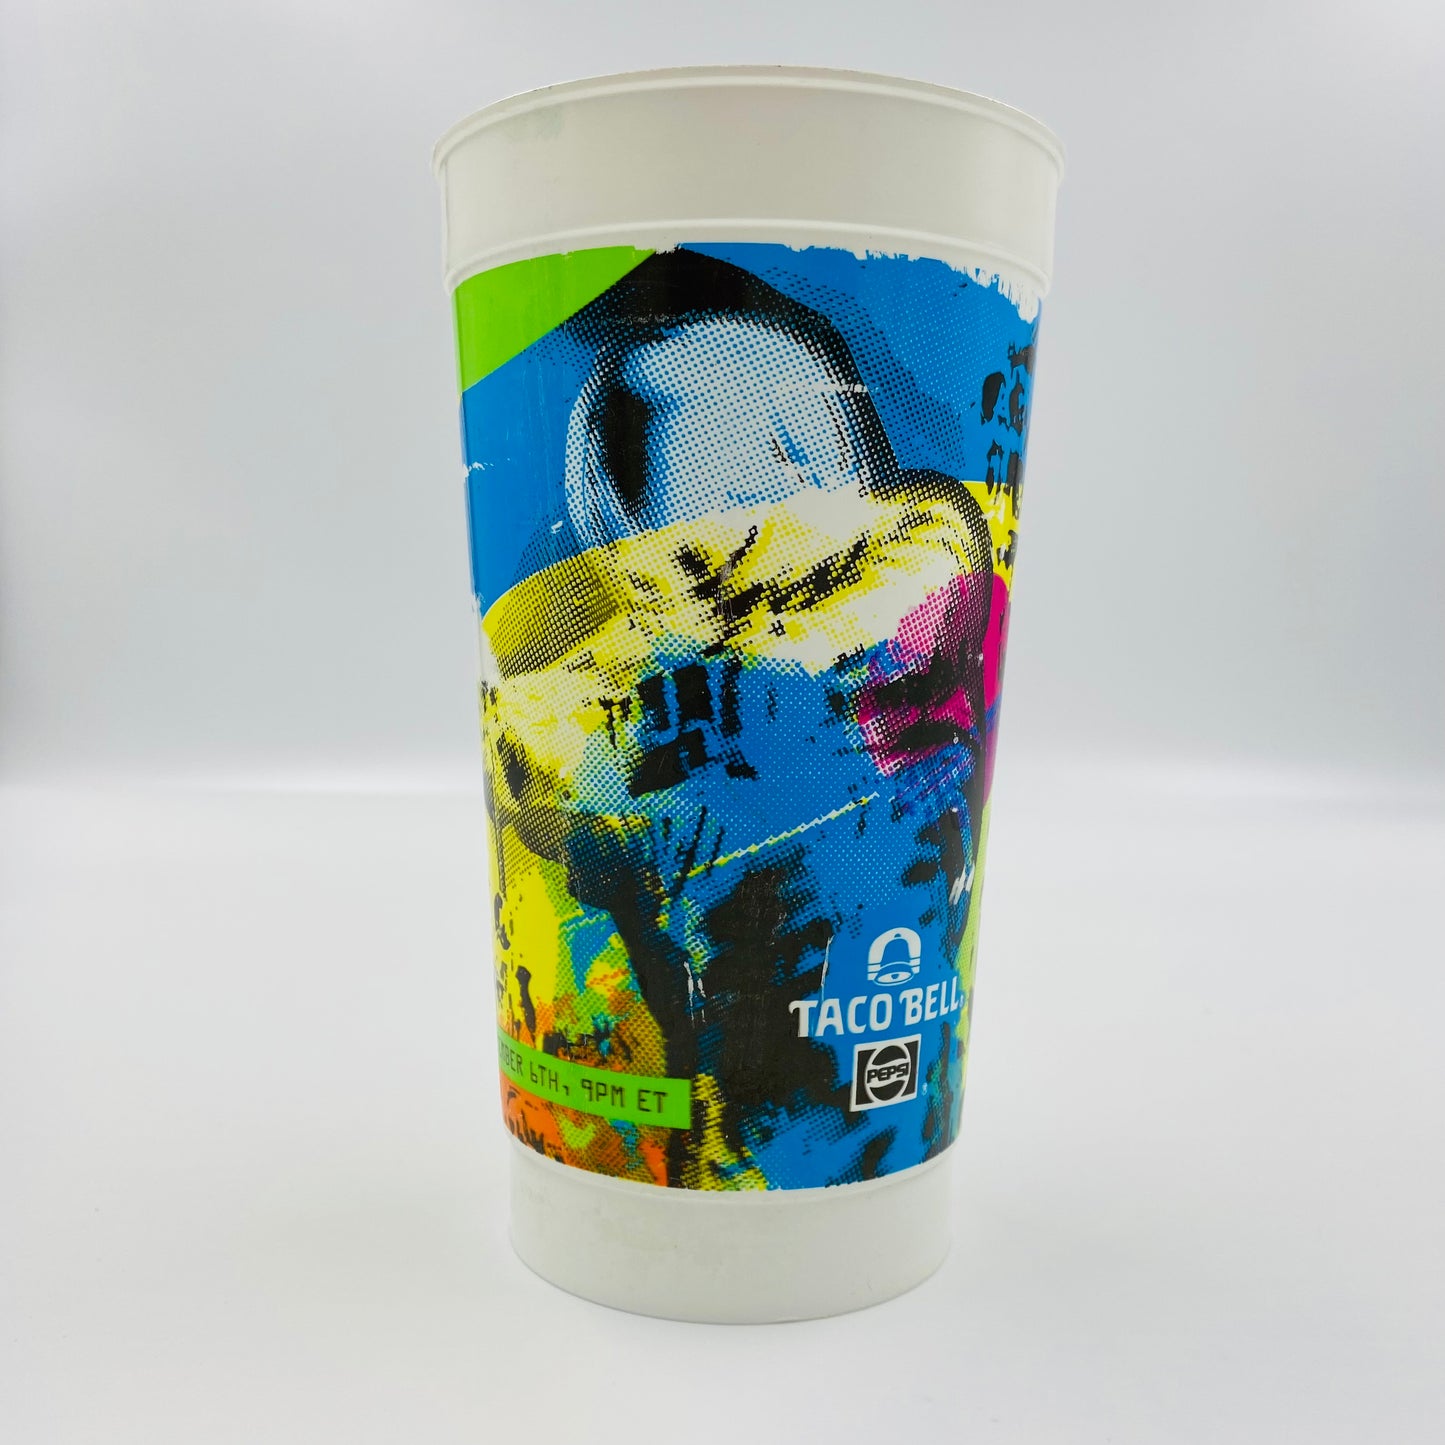 MTV VMA’s Video Music Awards blue/green/yellow 32oz plastic cup (1990) Taco Bell